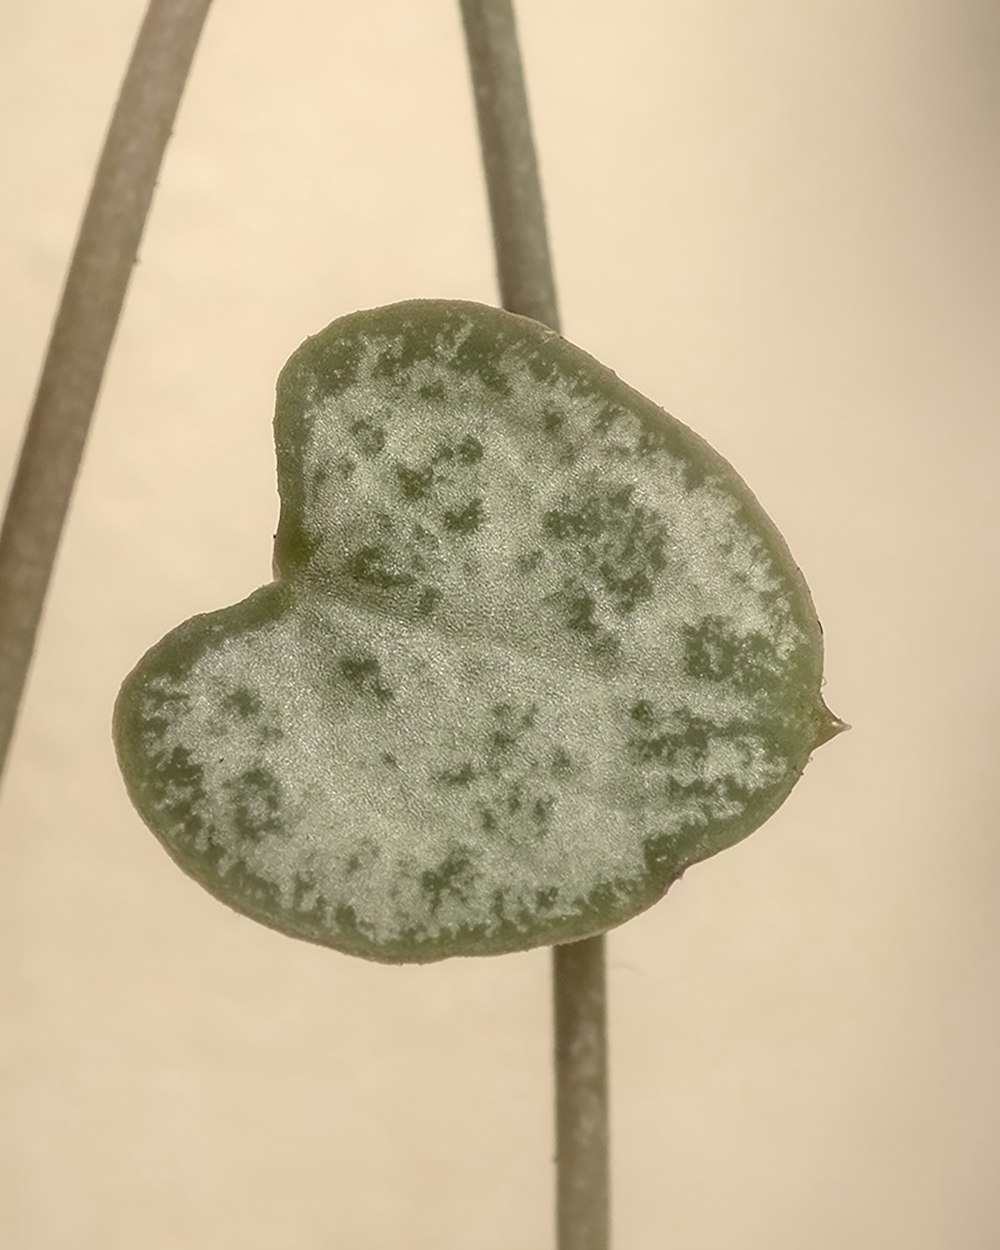 a leaf with a heart shaped substance on it